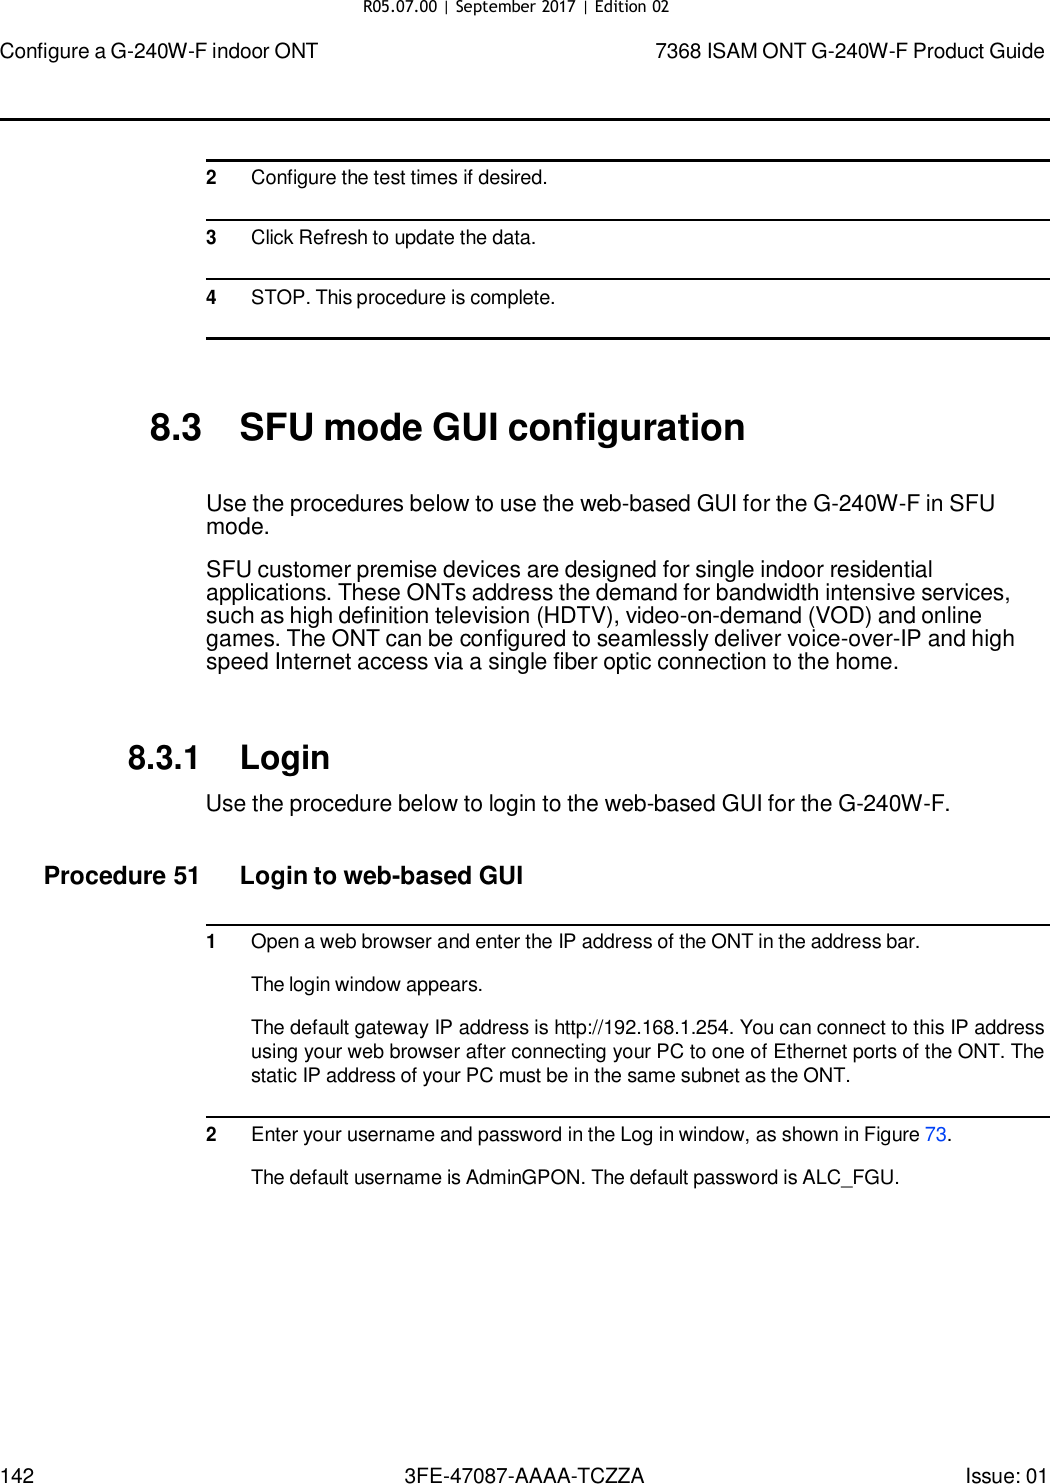 Page 136 of Nokia Bell G240WFV2 7368 ISAM GPON ONU User Manual 7368 ISAM ONT G 240W F Product Guide